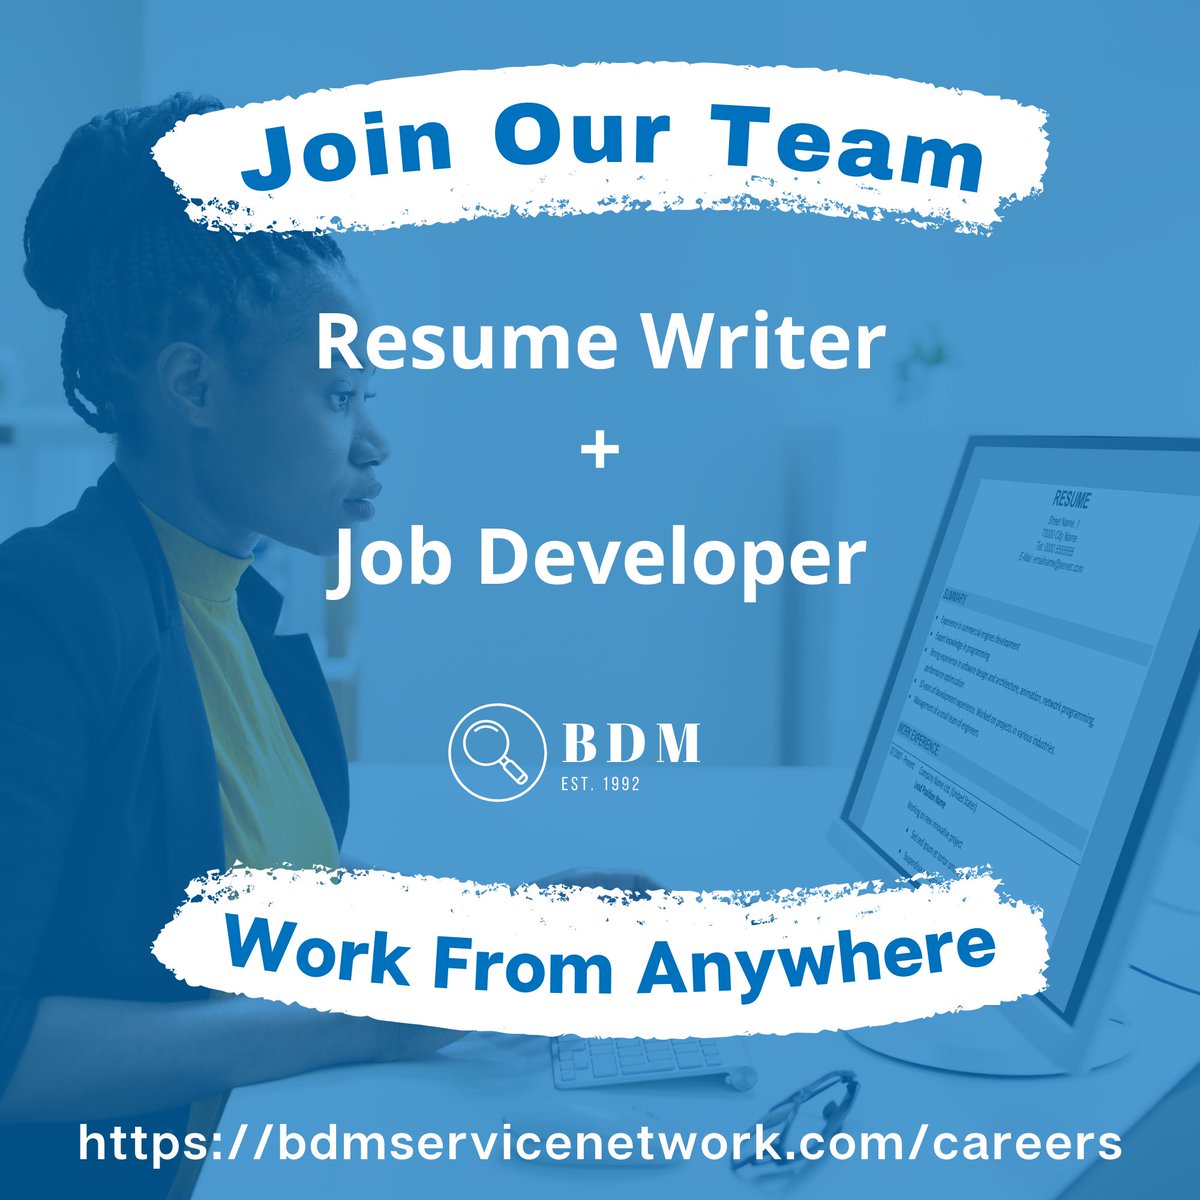 We're #hiring a Resume Writer + Job Developer. Join Our Team! Work From Anywhere. Apply today or repost to share. bdmservicenetwork.com/careers#f23c82… #resumewriter #resumewriting #jobdeveloper #remotejob #remotejobs #internationaljobs #canadajobs #usajobs #clientservice #virtualjobs